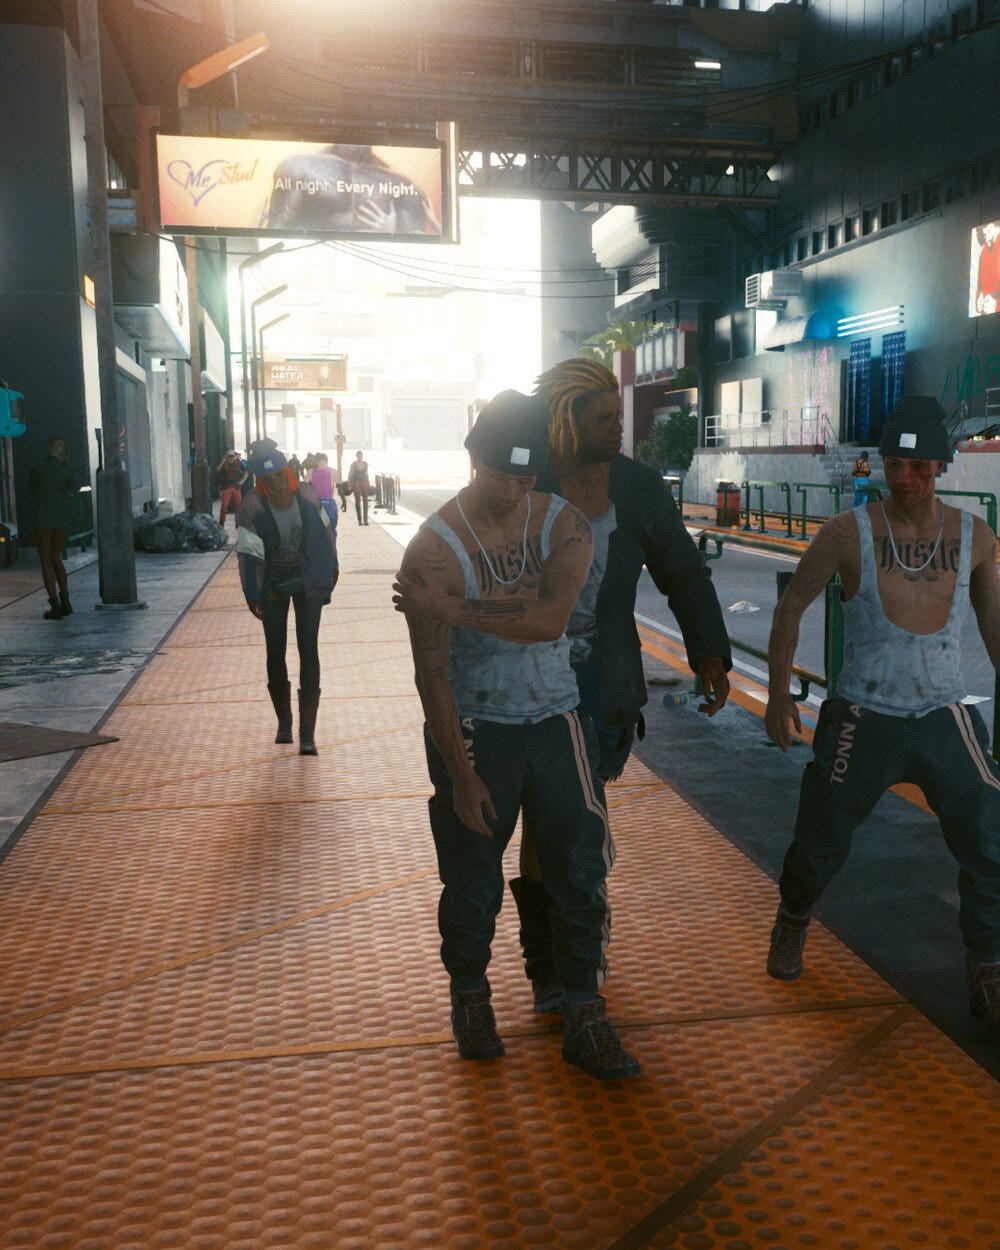 Capture from Cyberpunk 2077 showing two identical characters walking down a busy street